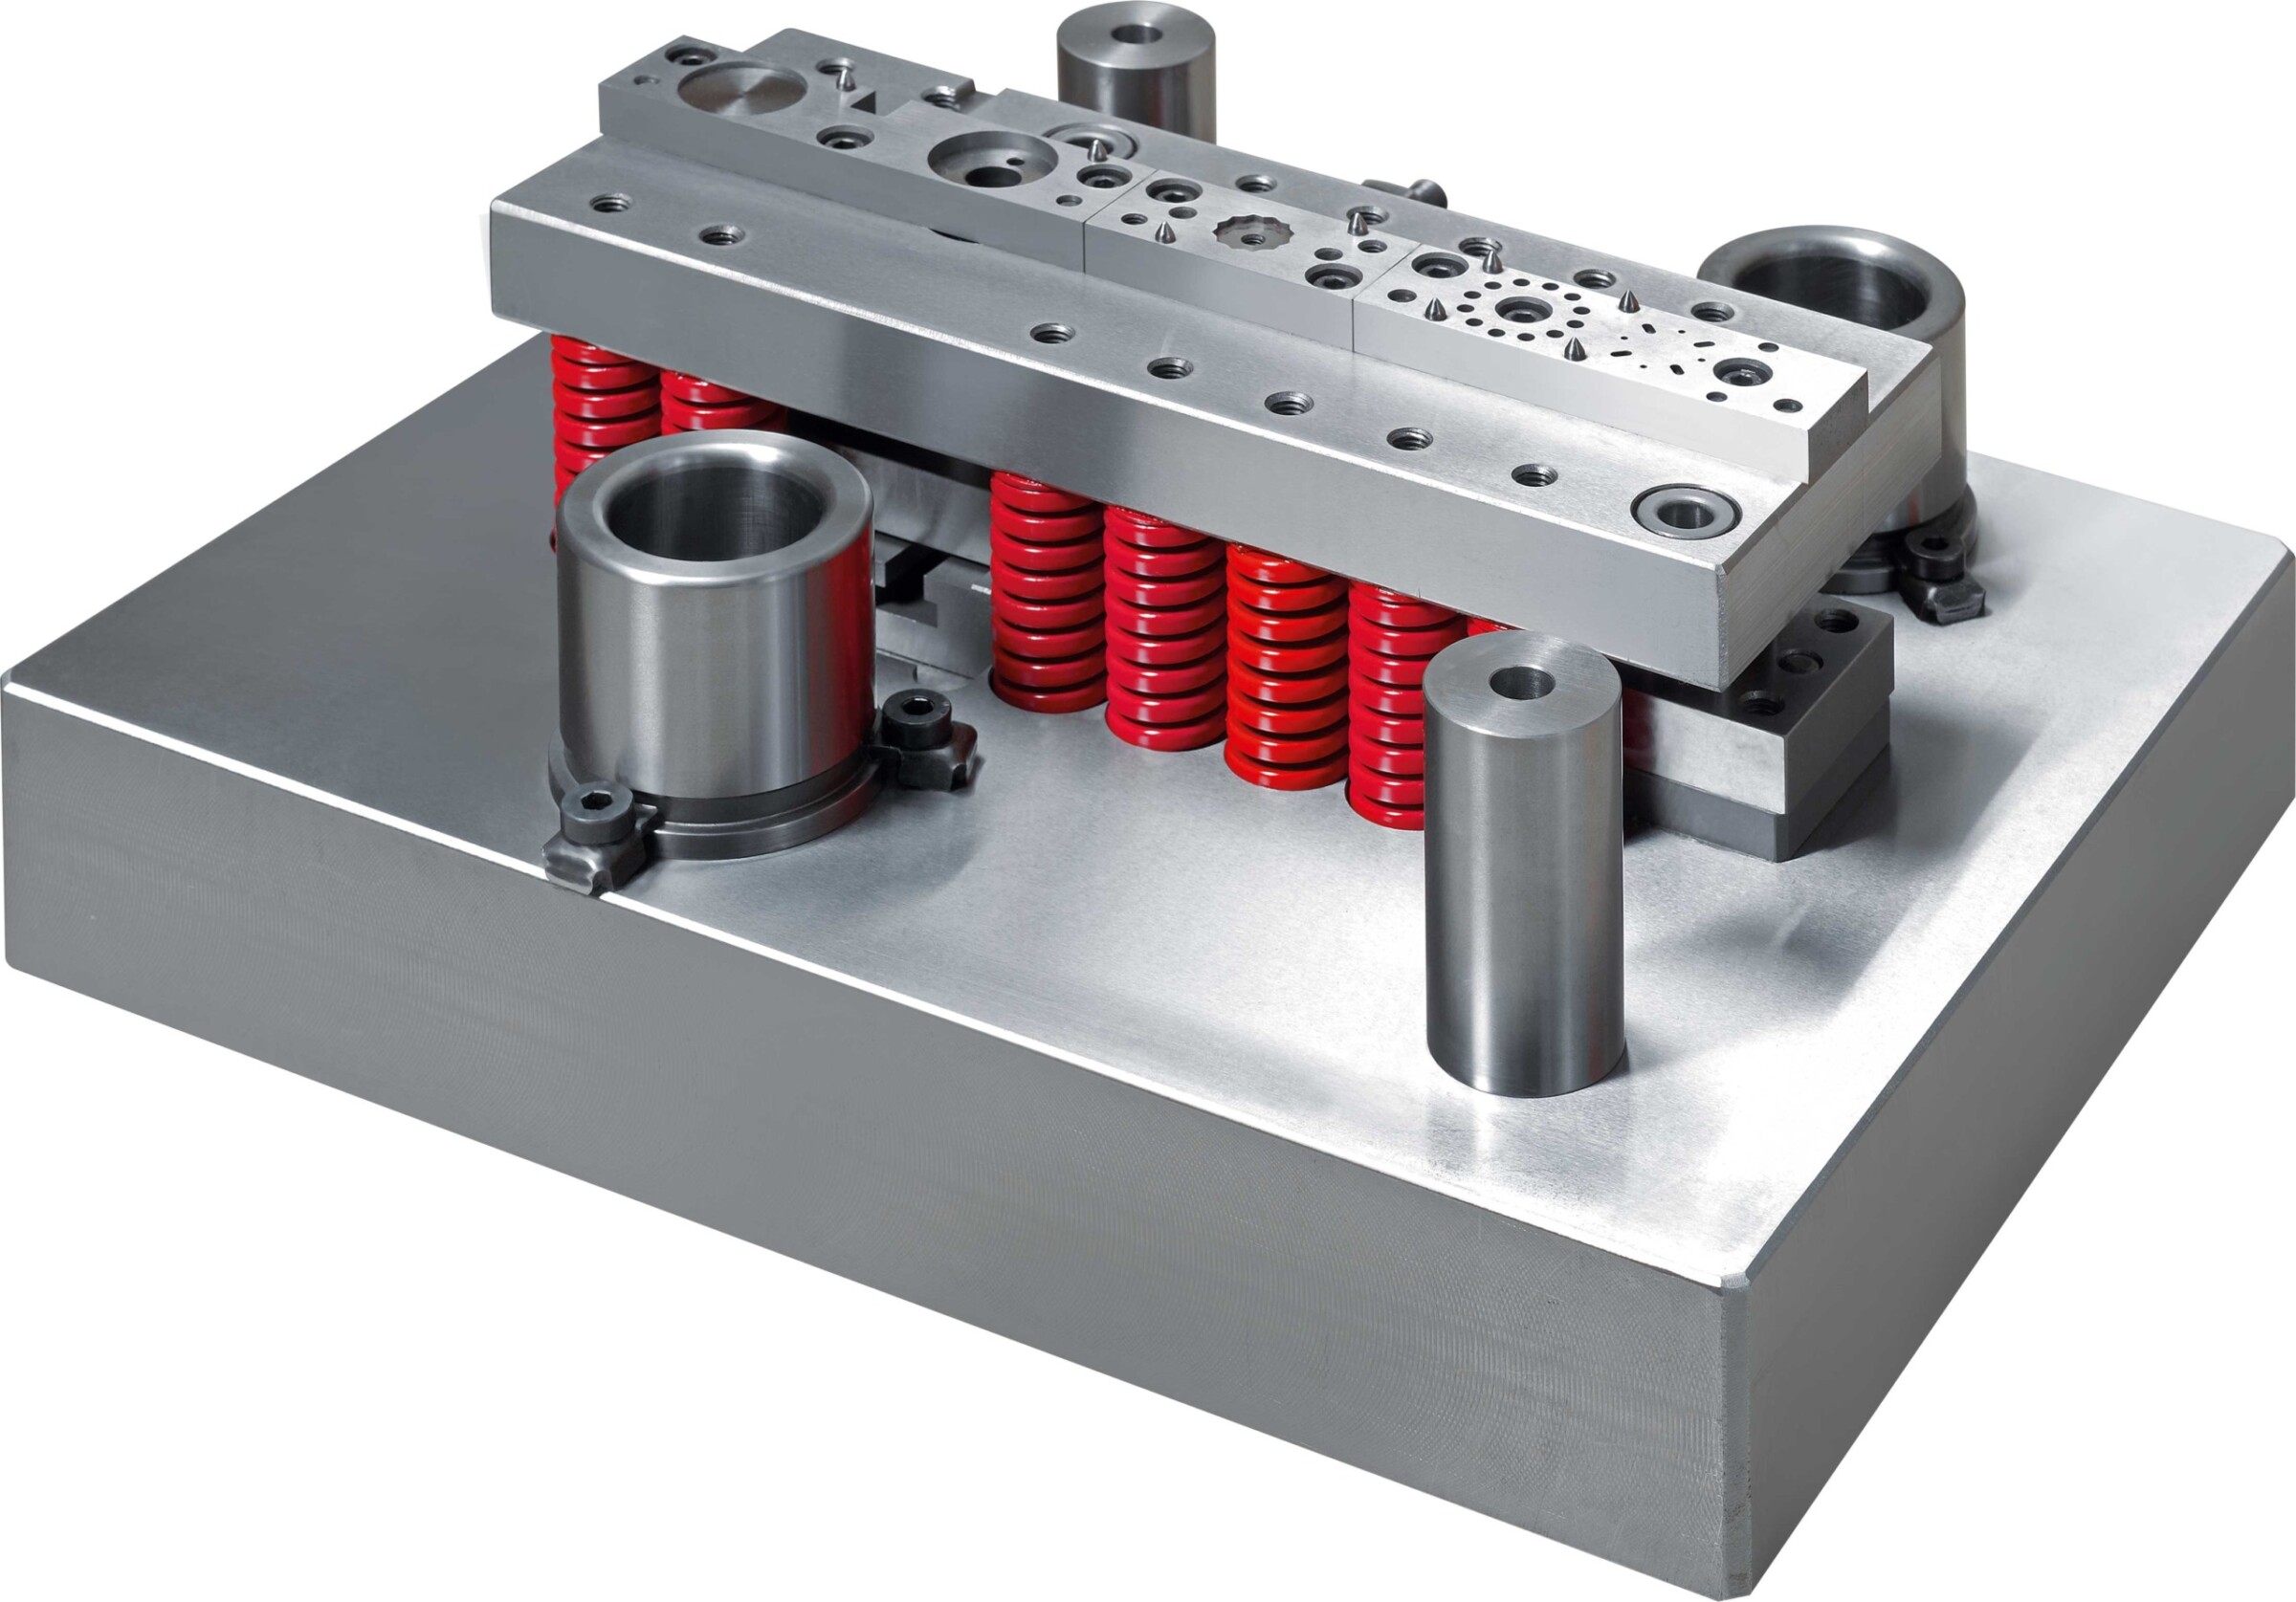 High-speed presses require high-quality tools for stamping and forming.